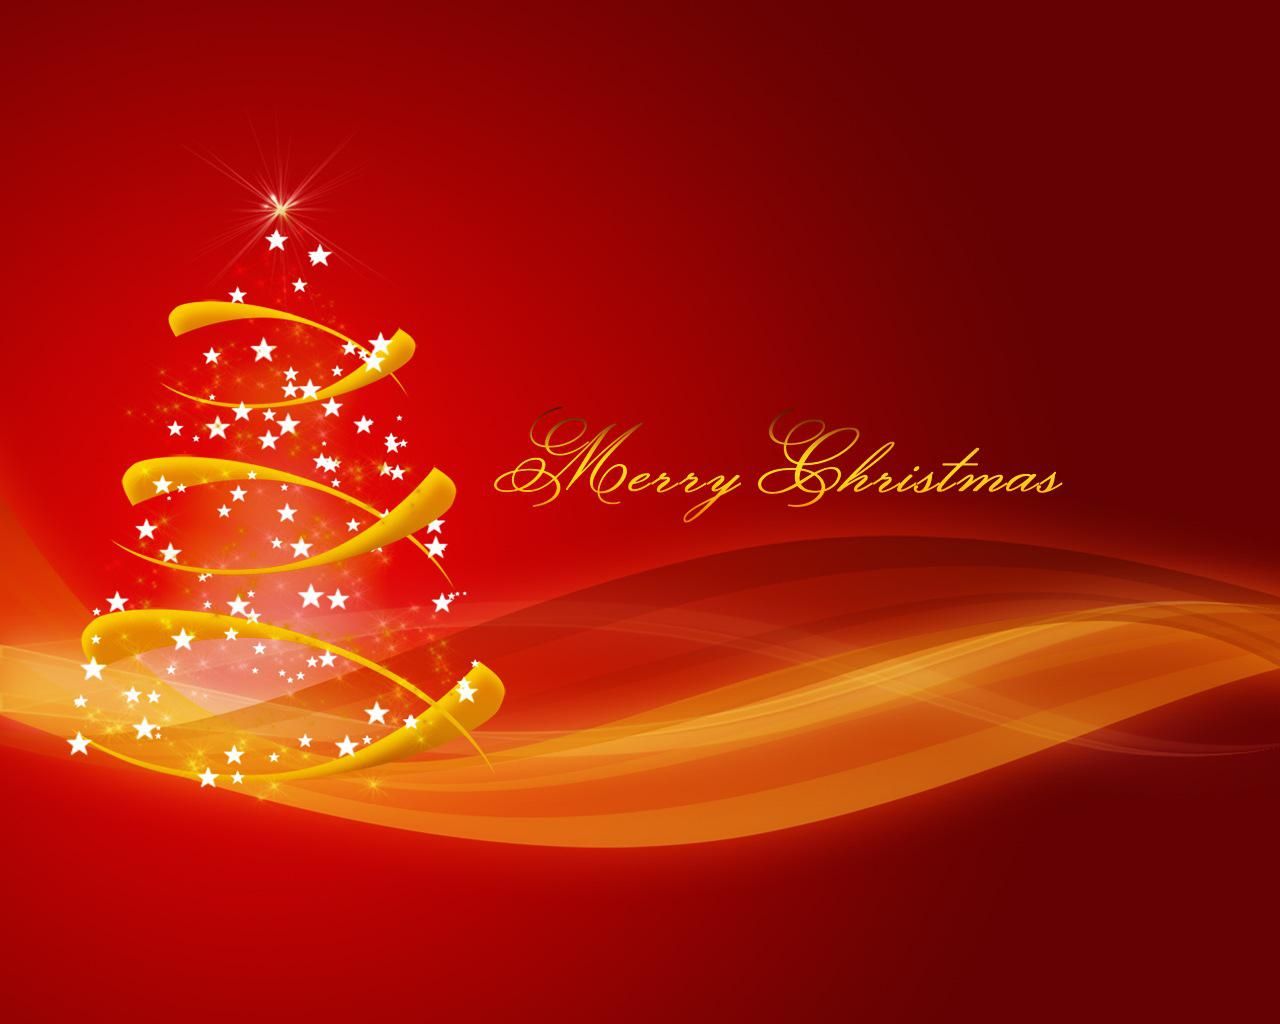 Free Christmas PowerPoint Backgrounds – Red Xmas | PowerPoint E ...